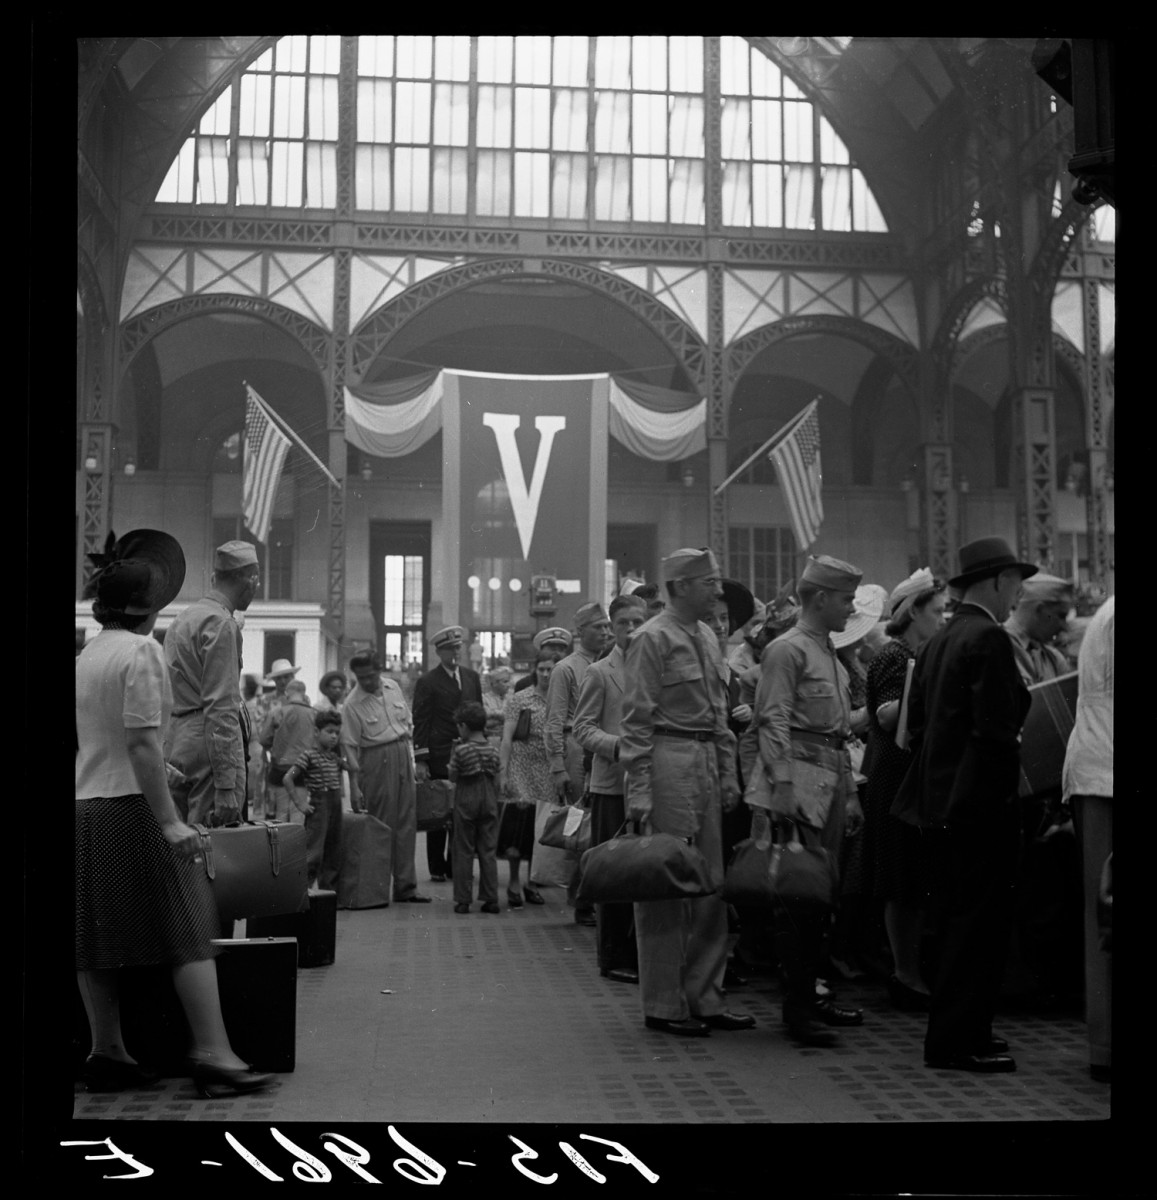  World War II increased traffic in Penn Station 80 percent between 1941 and 1942, as soldiers arrived in the city from across the nation and then left for North Africa and Europe. (Courtesy of the New York Historical Society)